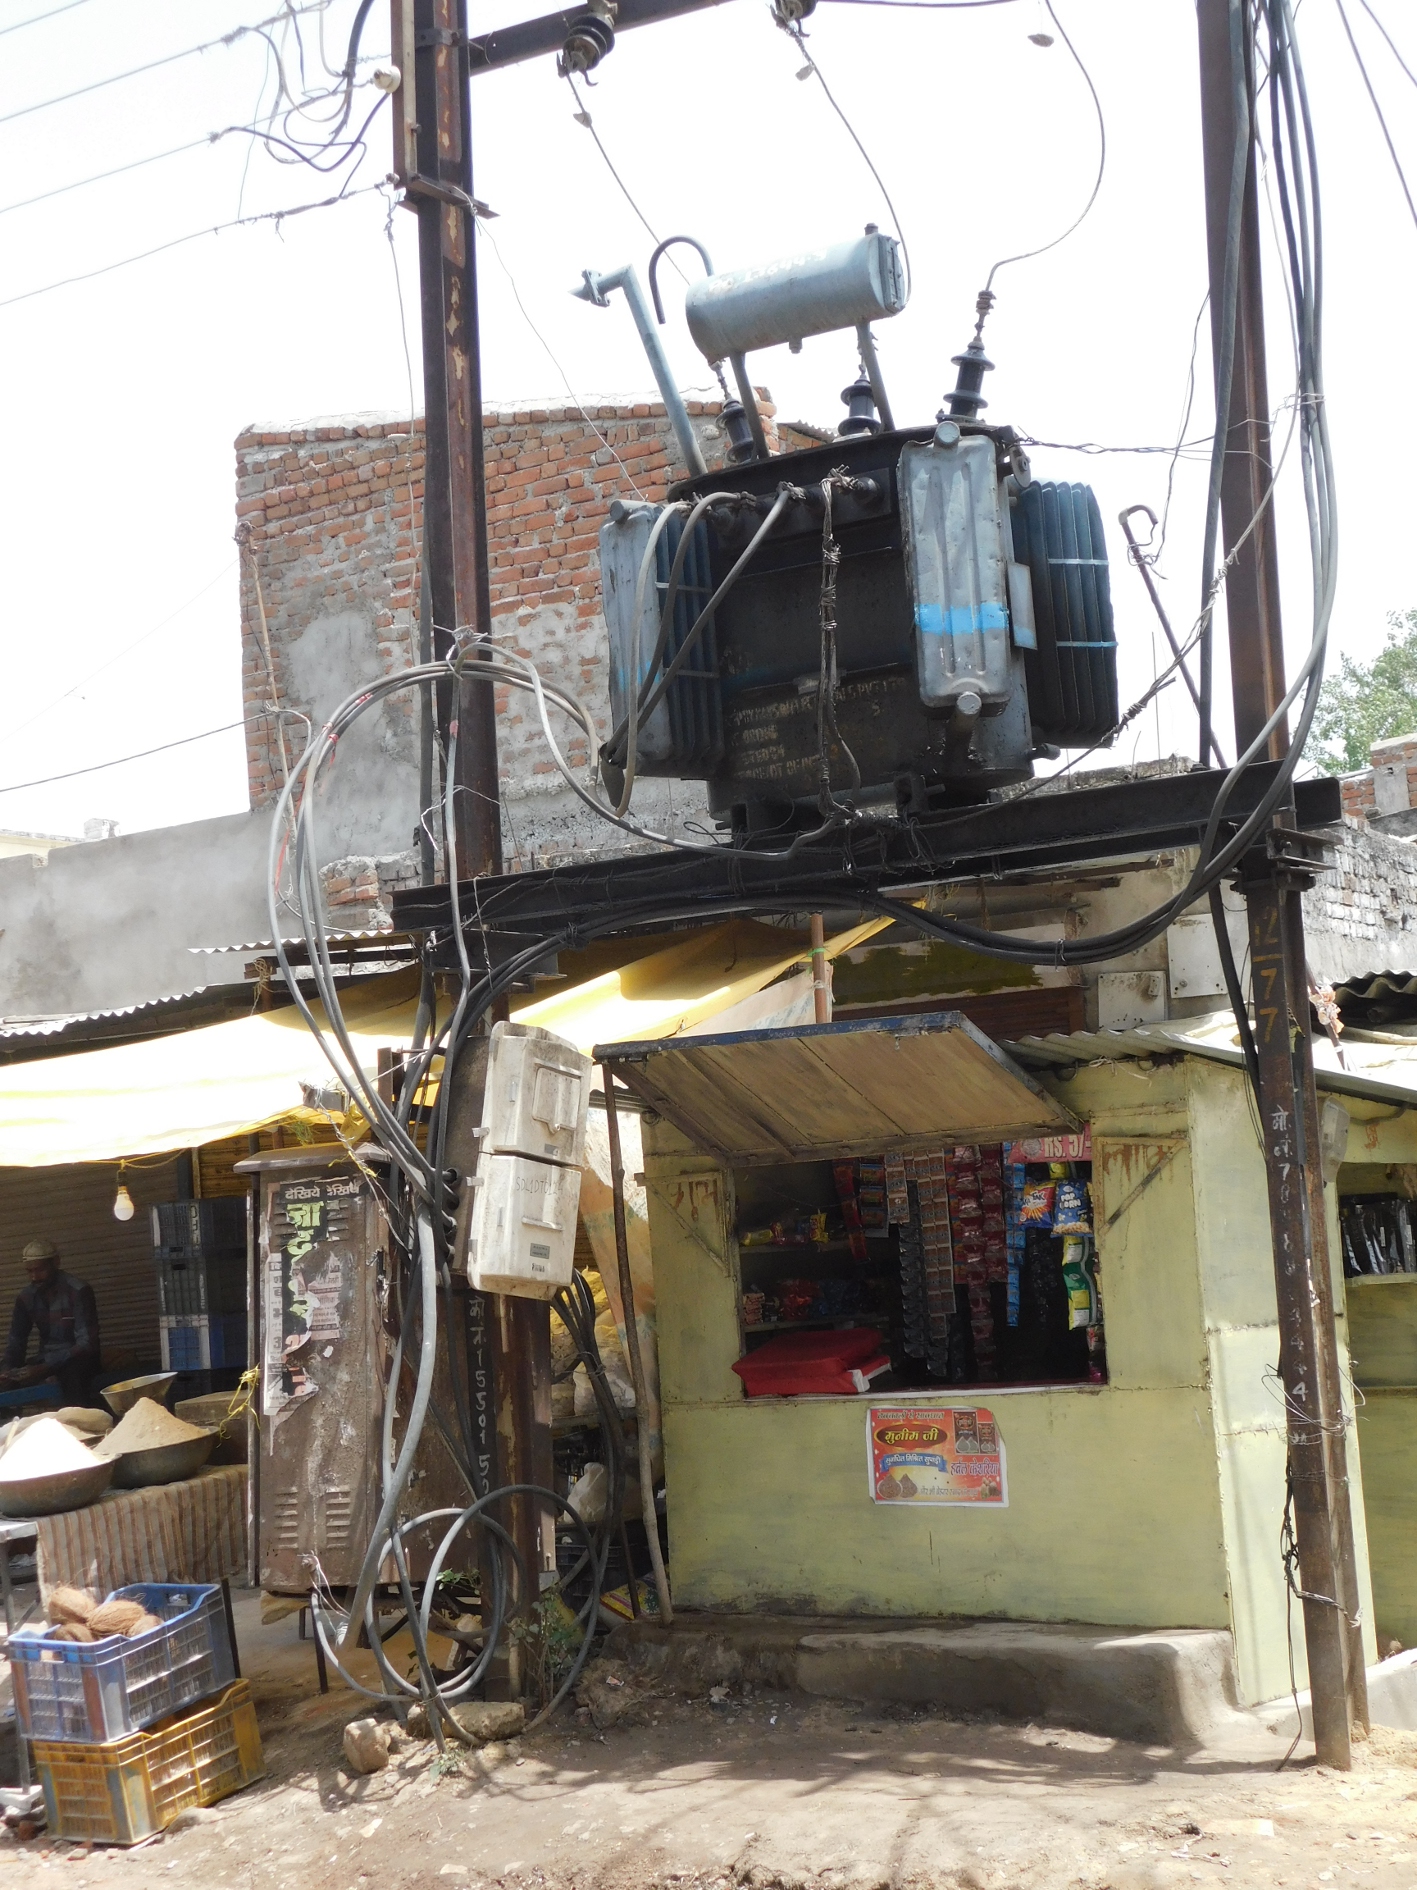 Shops flown under the transformer inviting accidents